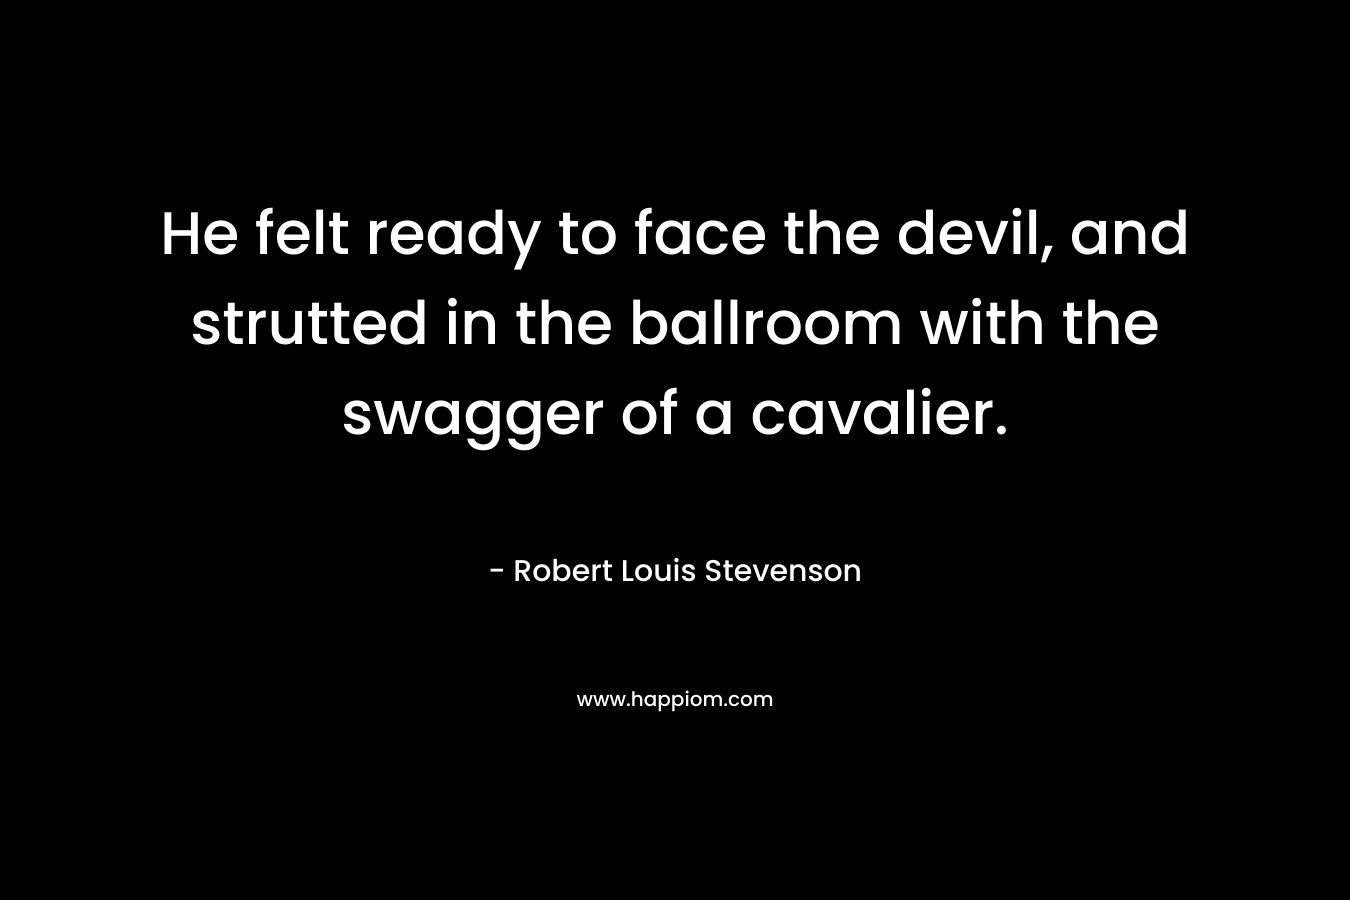 He felt ready to face the devil, and strutted in the ballroom with the swagger of a cavalier. – Robert Louis Stevenson